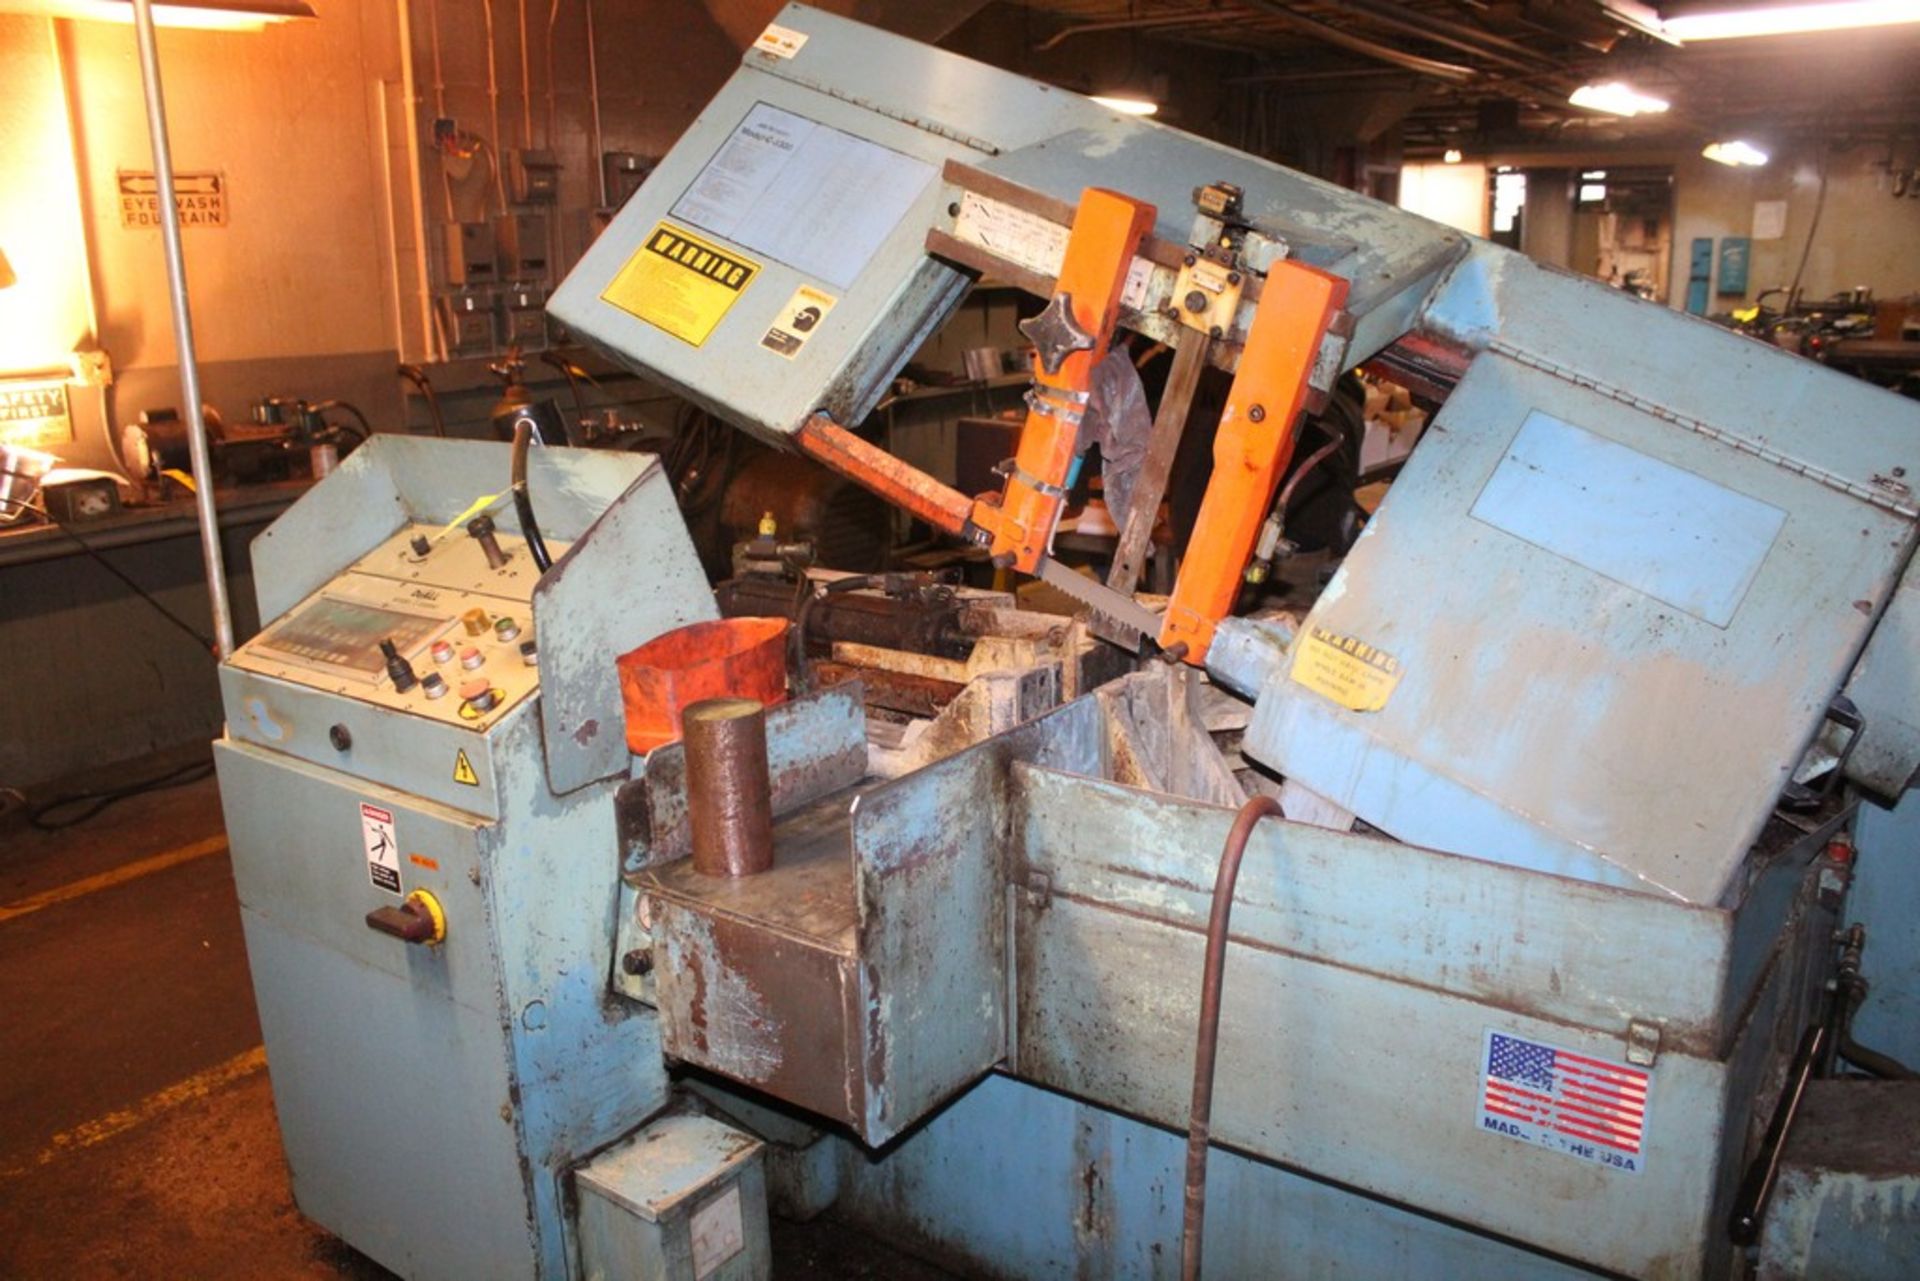 DOALL 13" X13" MODEL C-3300NC PROGRAMMABLE AUTOMATIC FEED HORIZONTAL BAND SAW, S/N 521-96157 - Image 4 of 7